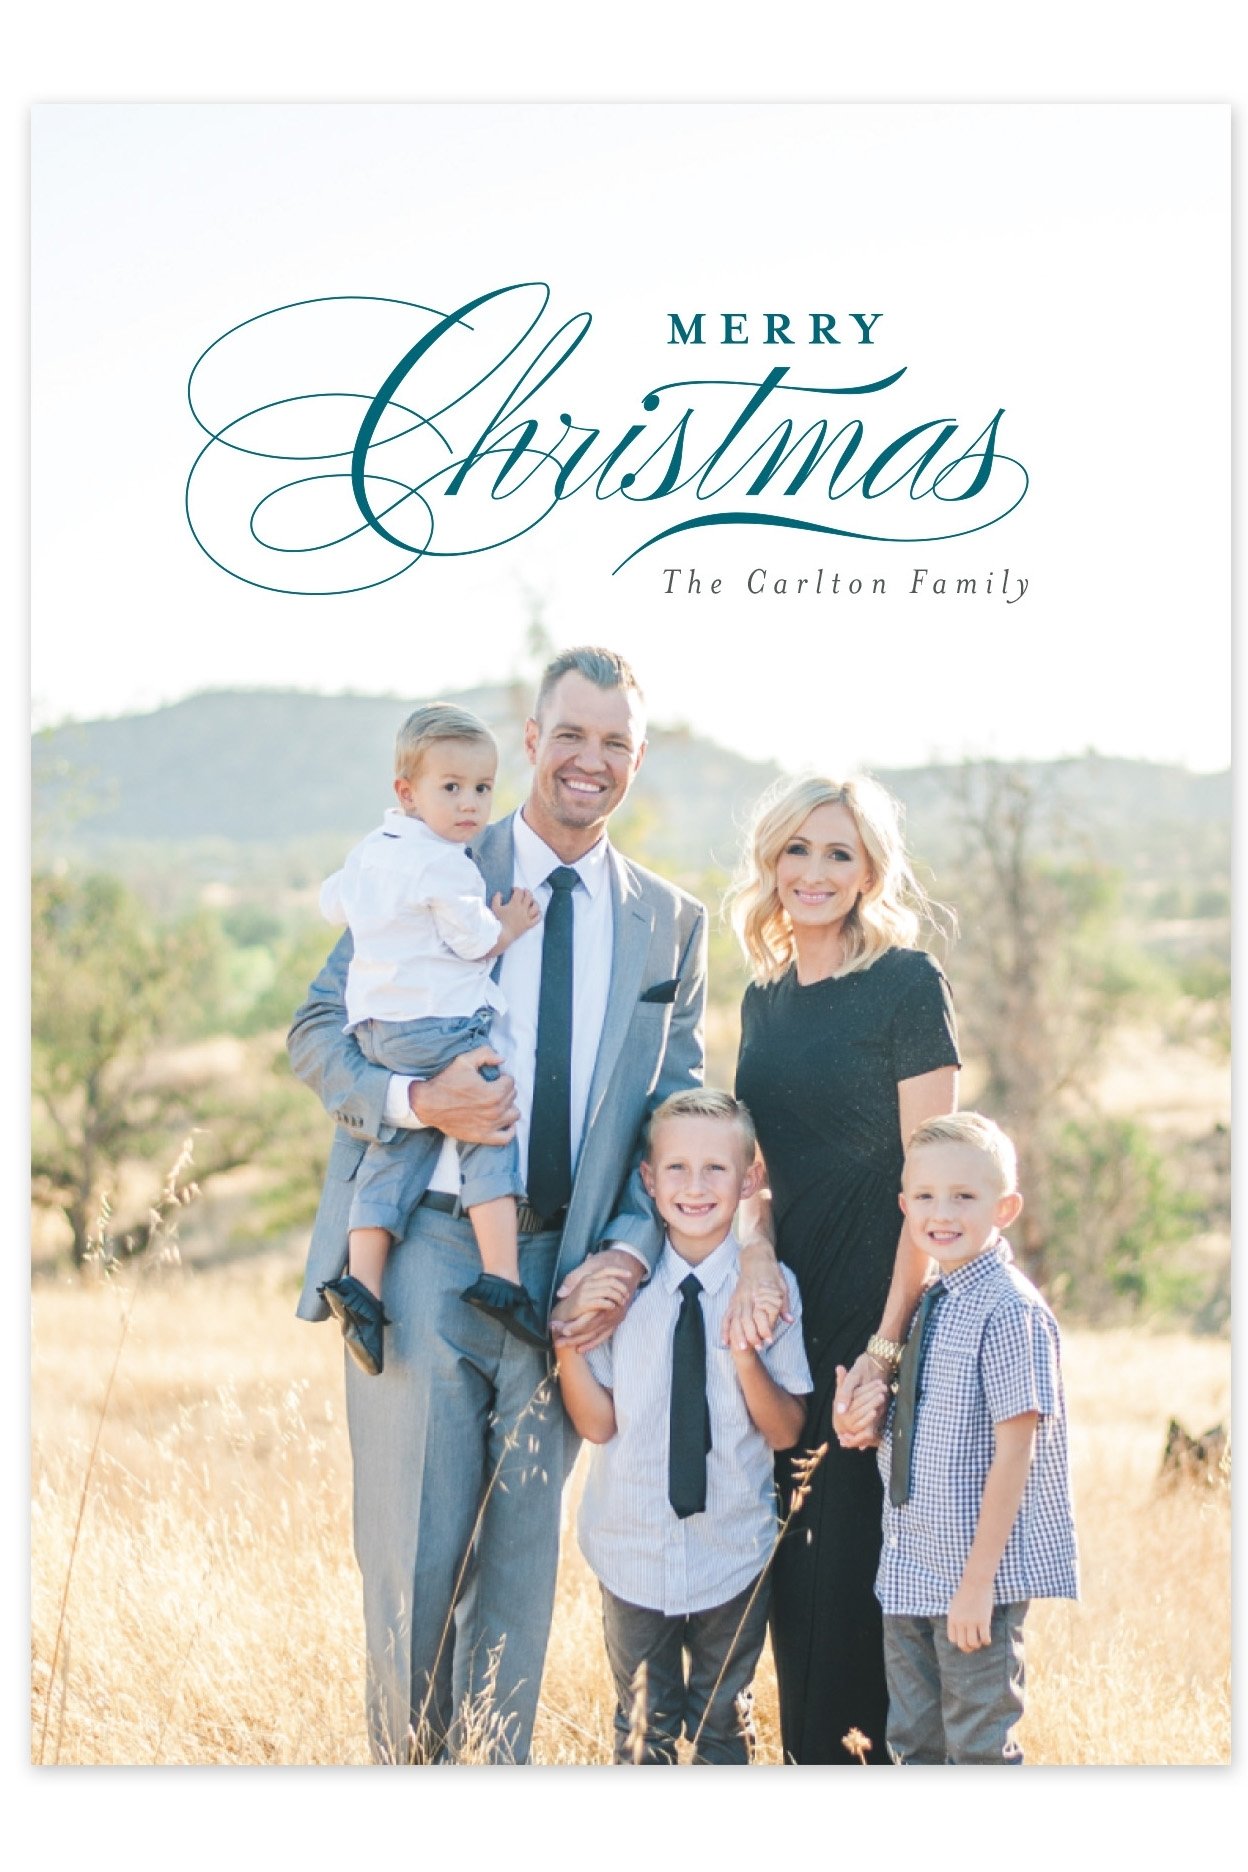 10 Unique Family Christmas Card Picture Ideas funny christmas card photo ideas merry christmas and happy new 2022